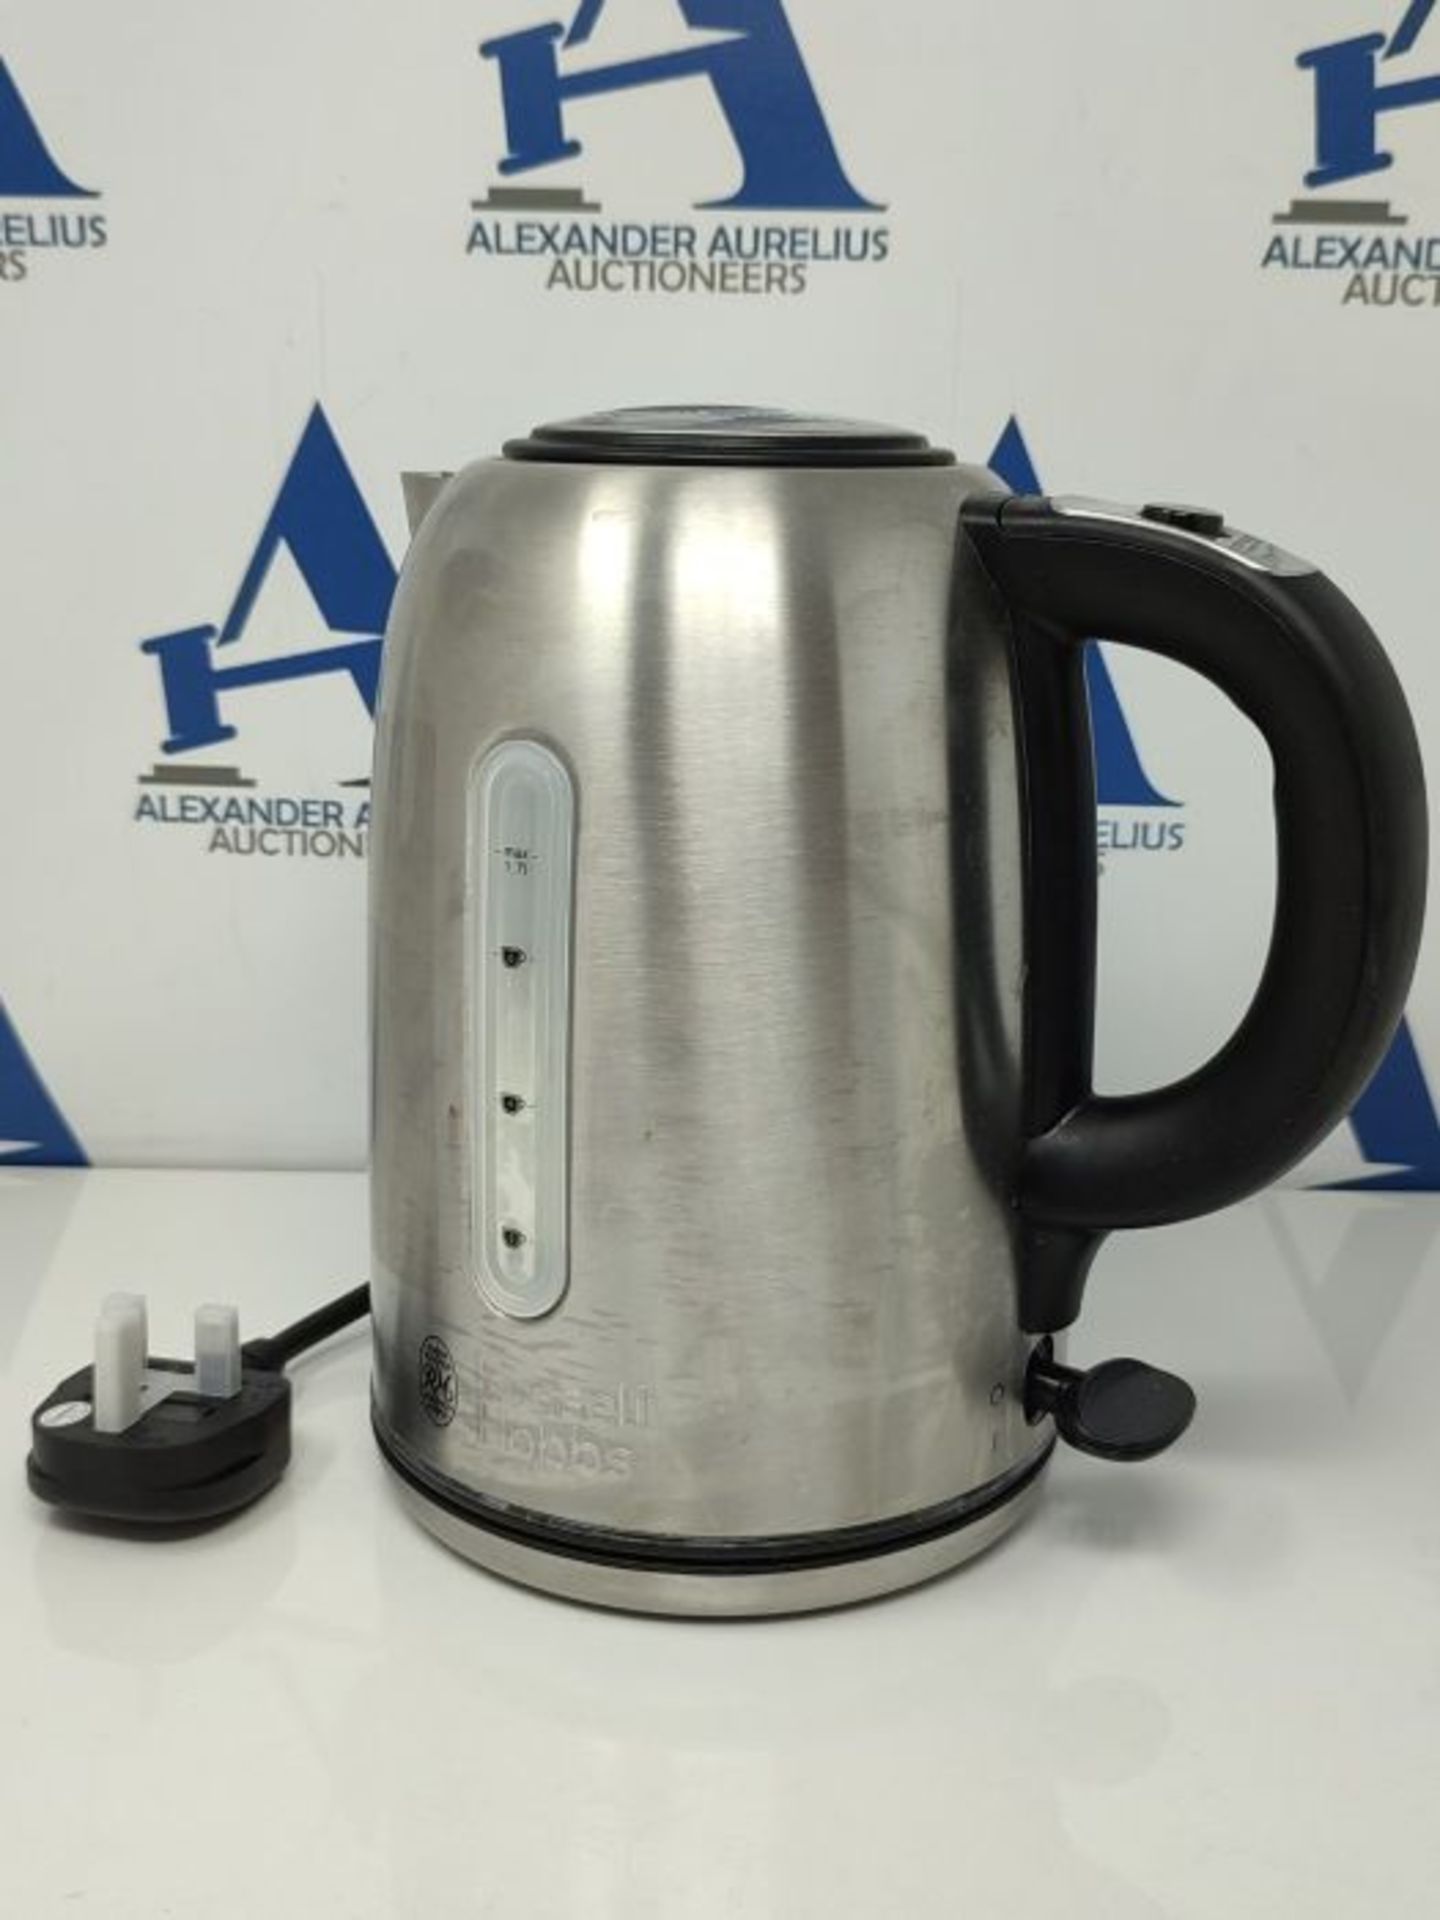 Russell Hobbs 20460 Quiet Boil Kettle, Brushed Stainless Steel, 3000W, 1.7 Litres - Image 3 of 3